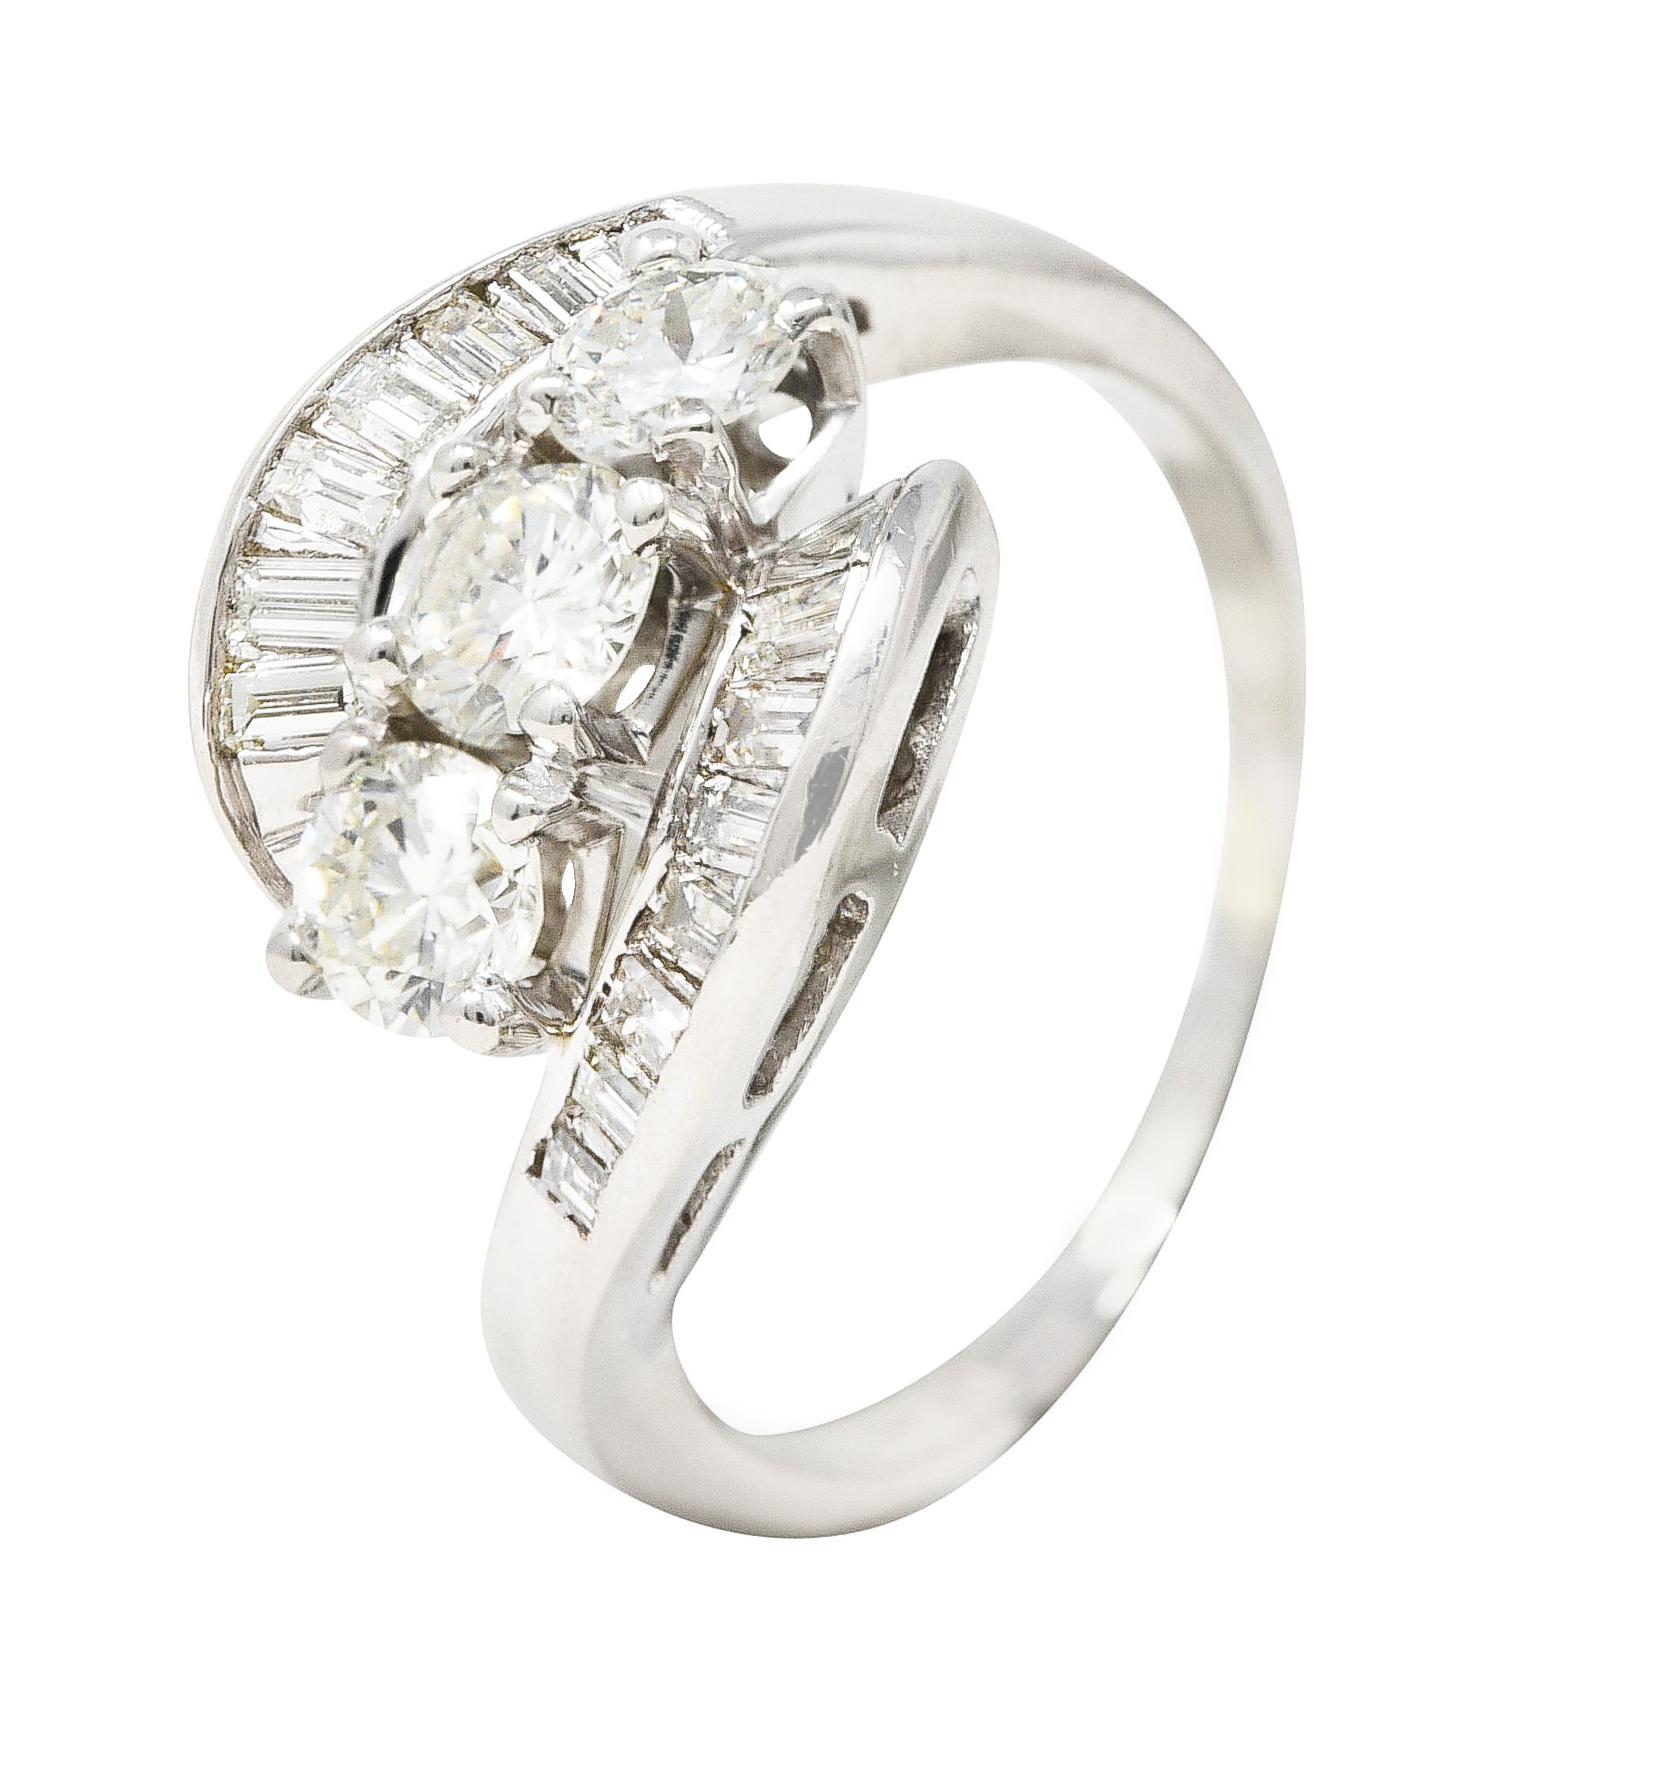 Centering three round brilliant cut diamonds prong set East to West. Weighing approximately 1.11 carats total - I/J in color with SI clarity. Flanked North to South by swirling bypass style shoulders. Channel set with baguette cut diamonds